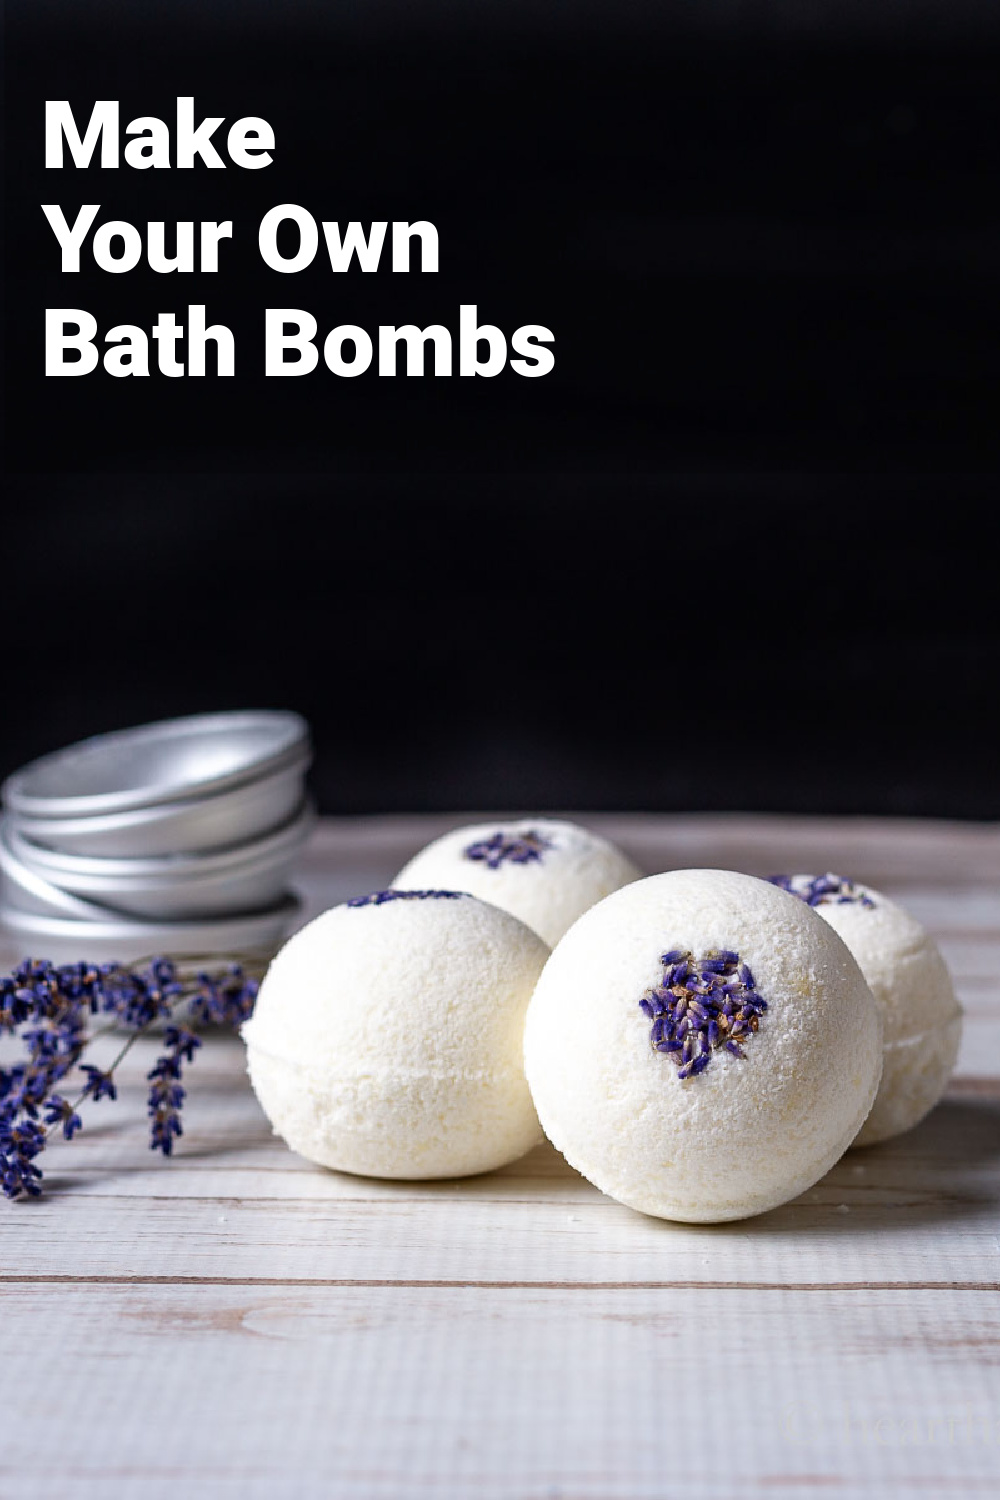 Lavender flower bath bombs next to metal molds and dried lavender flowers.